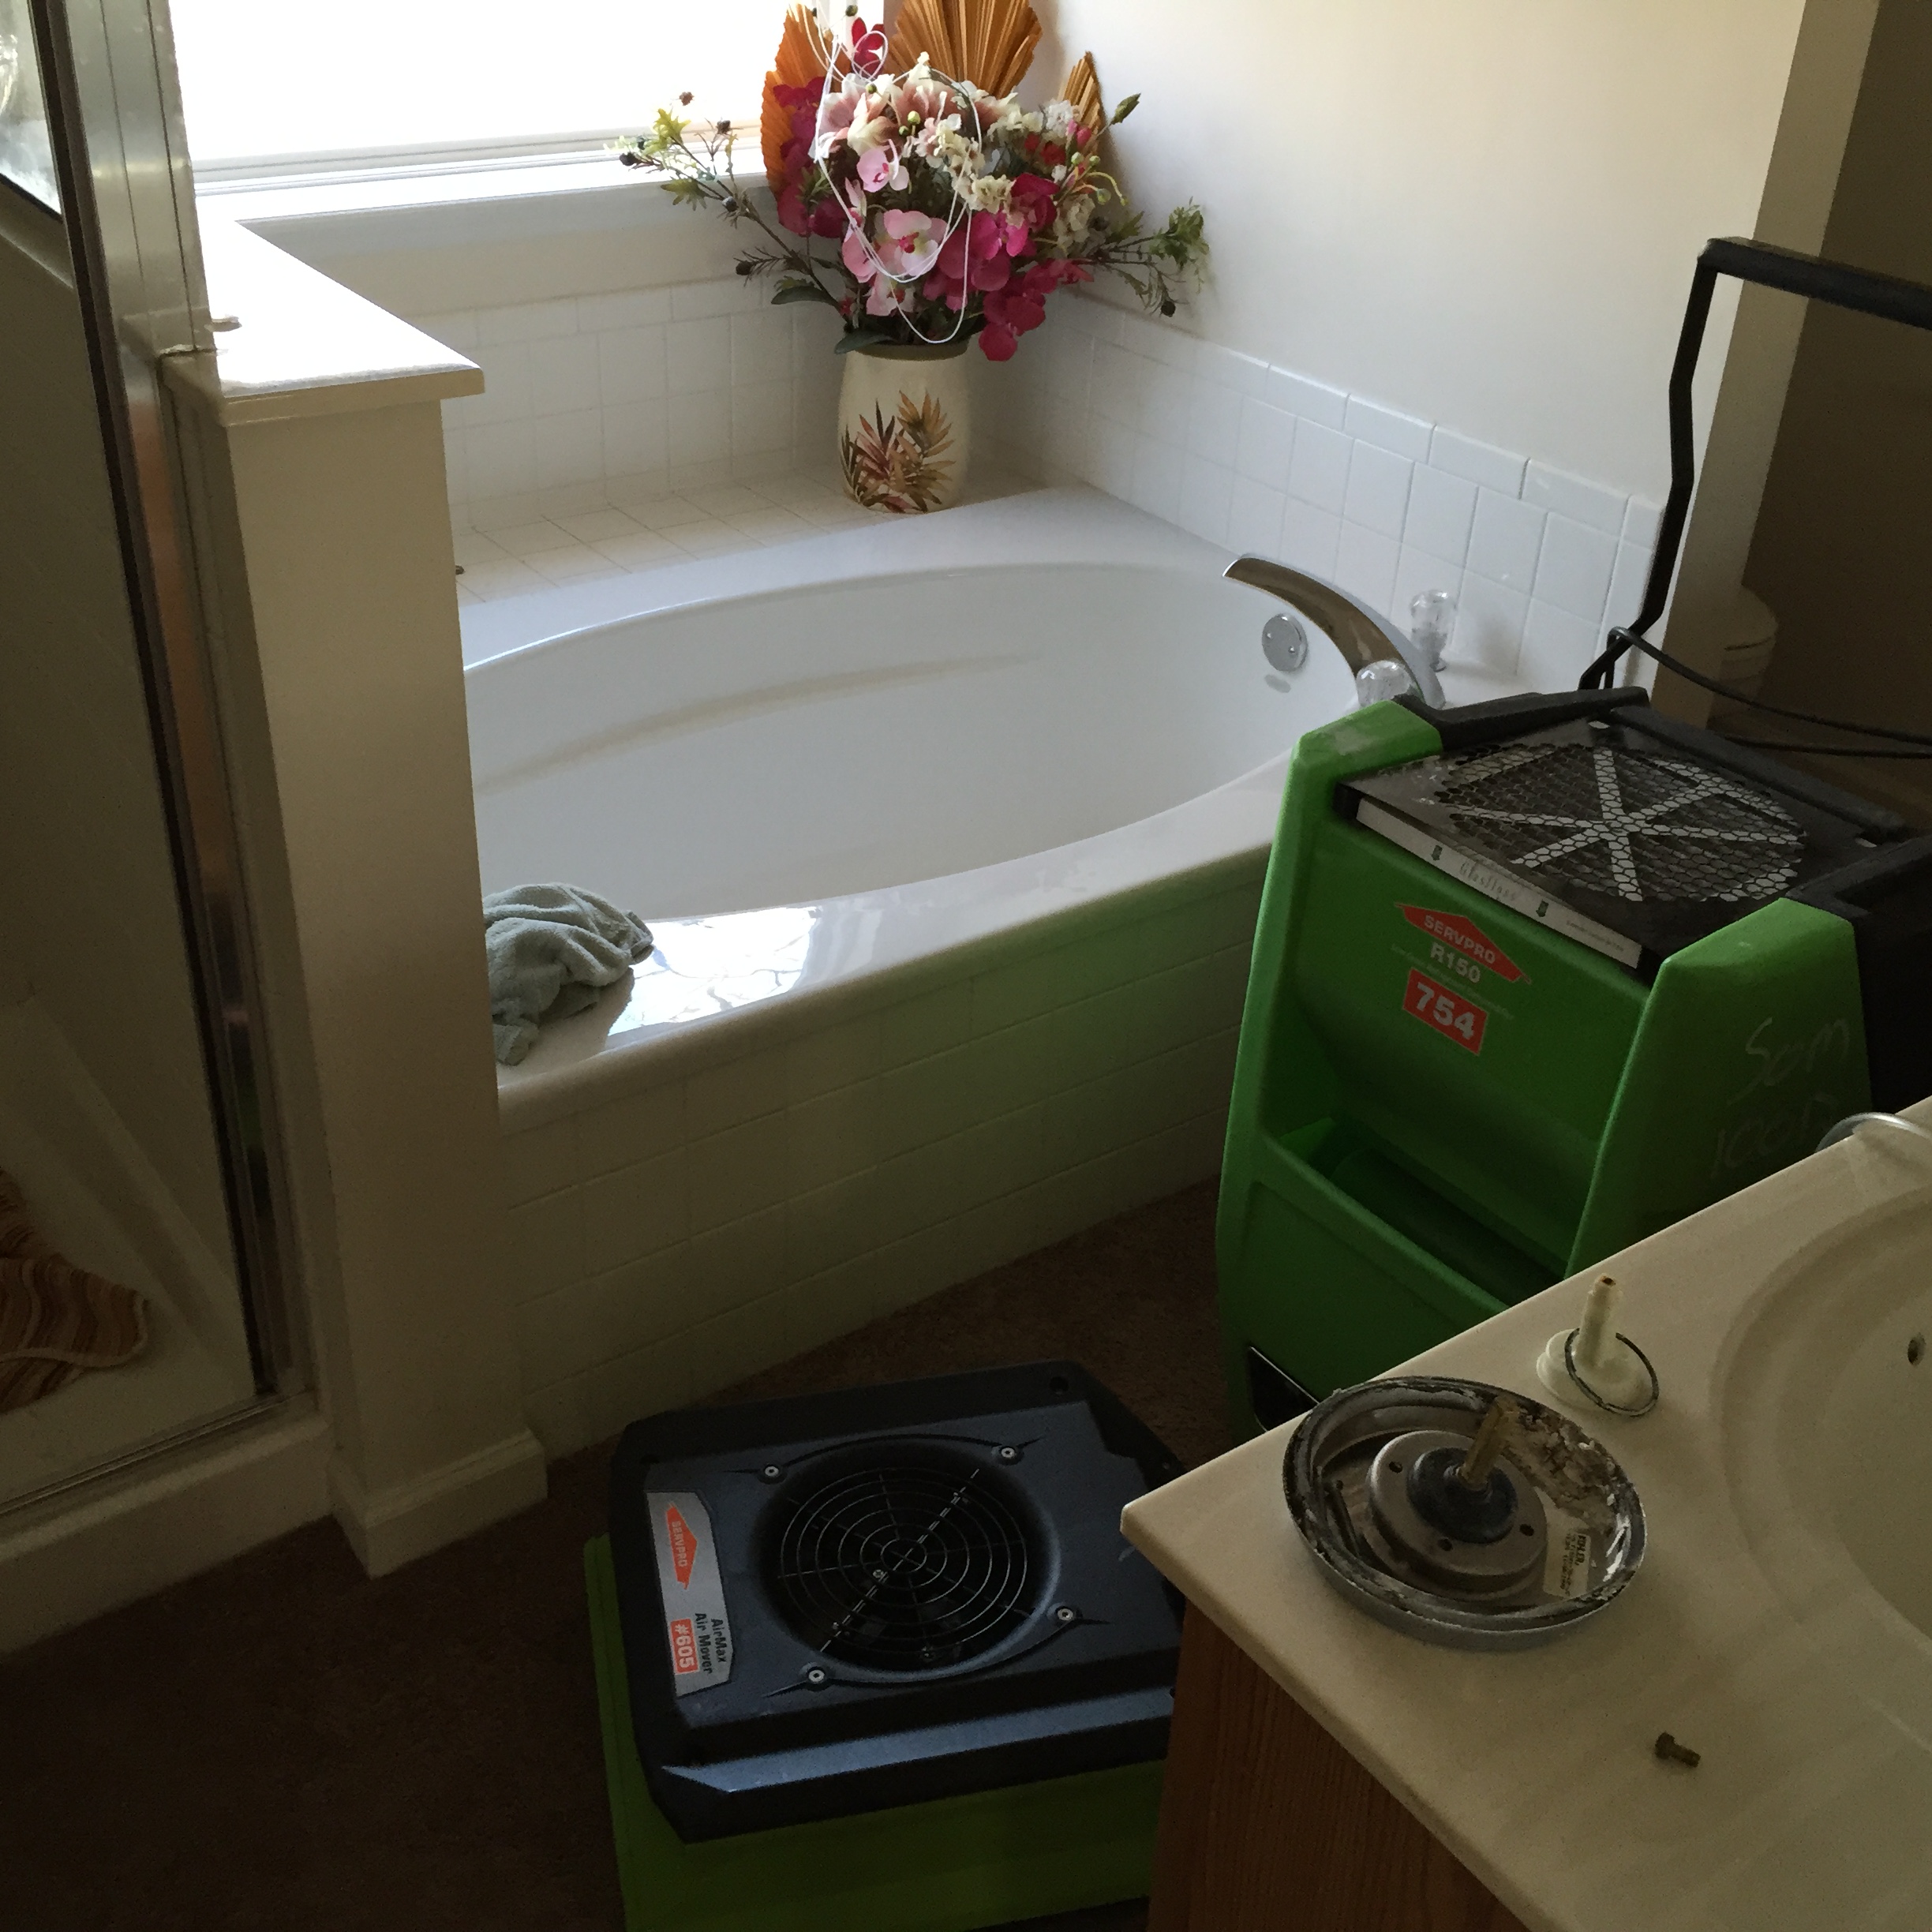 The SERVPRO equipment is up and running during a residential water restoration.